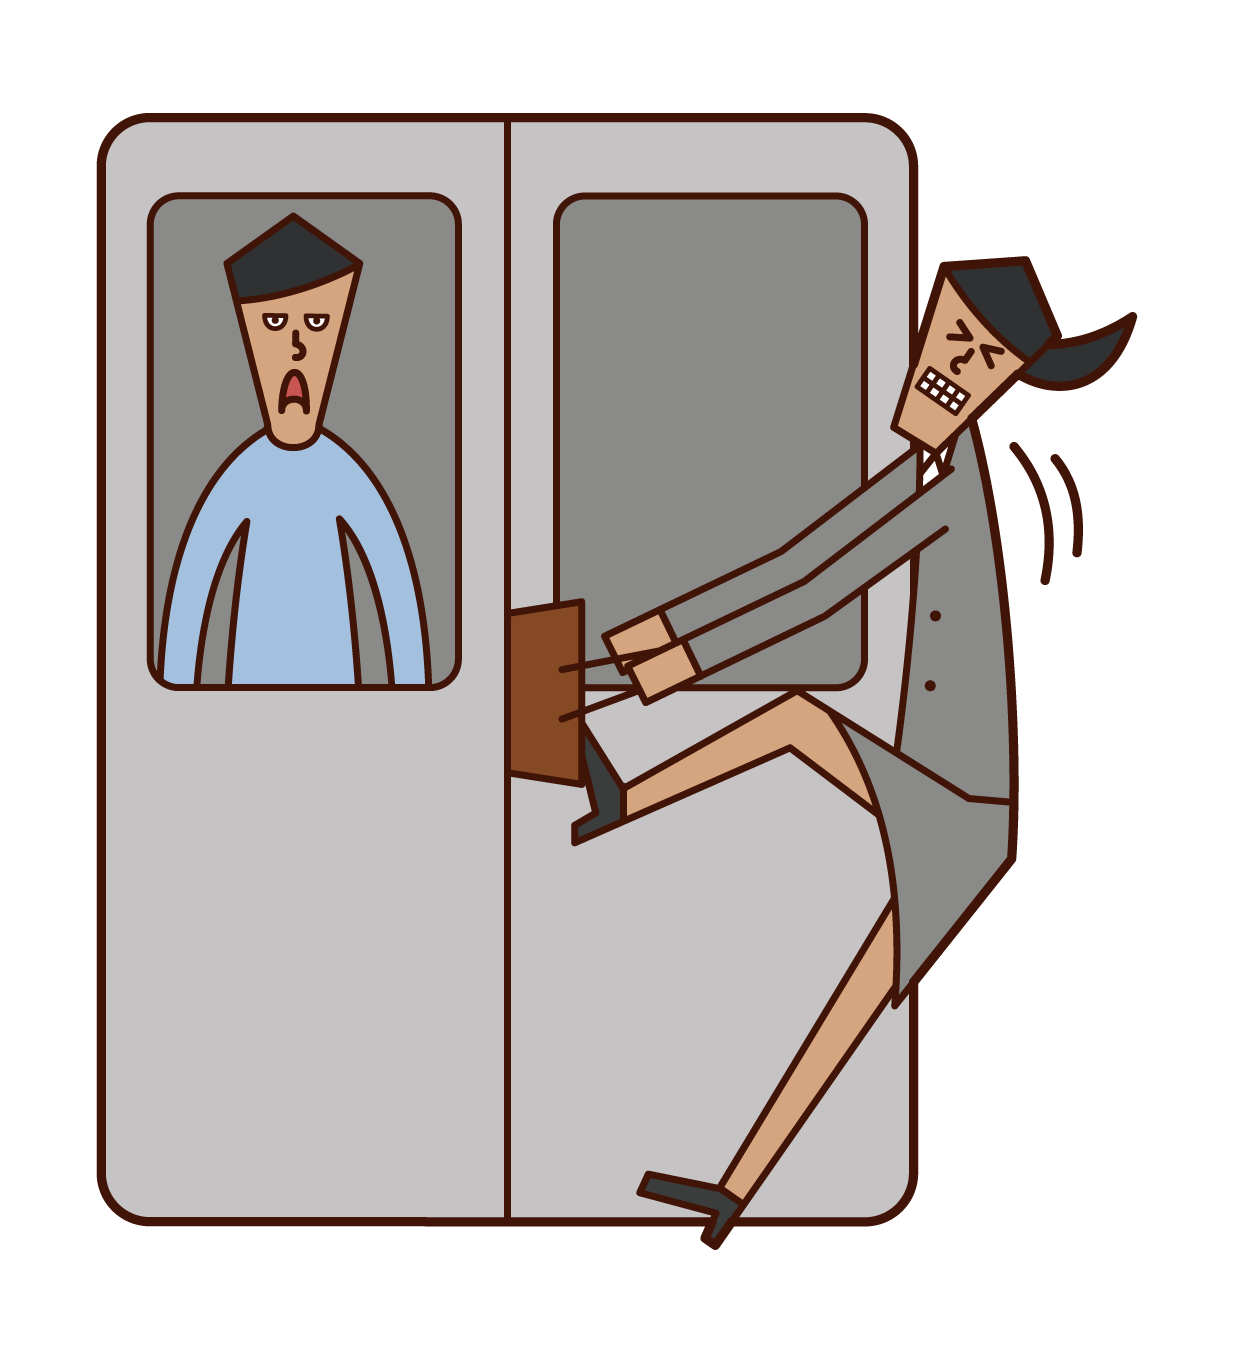 Illustration of a woman with luggage stuck in a train door